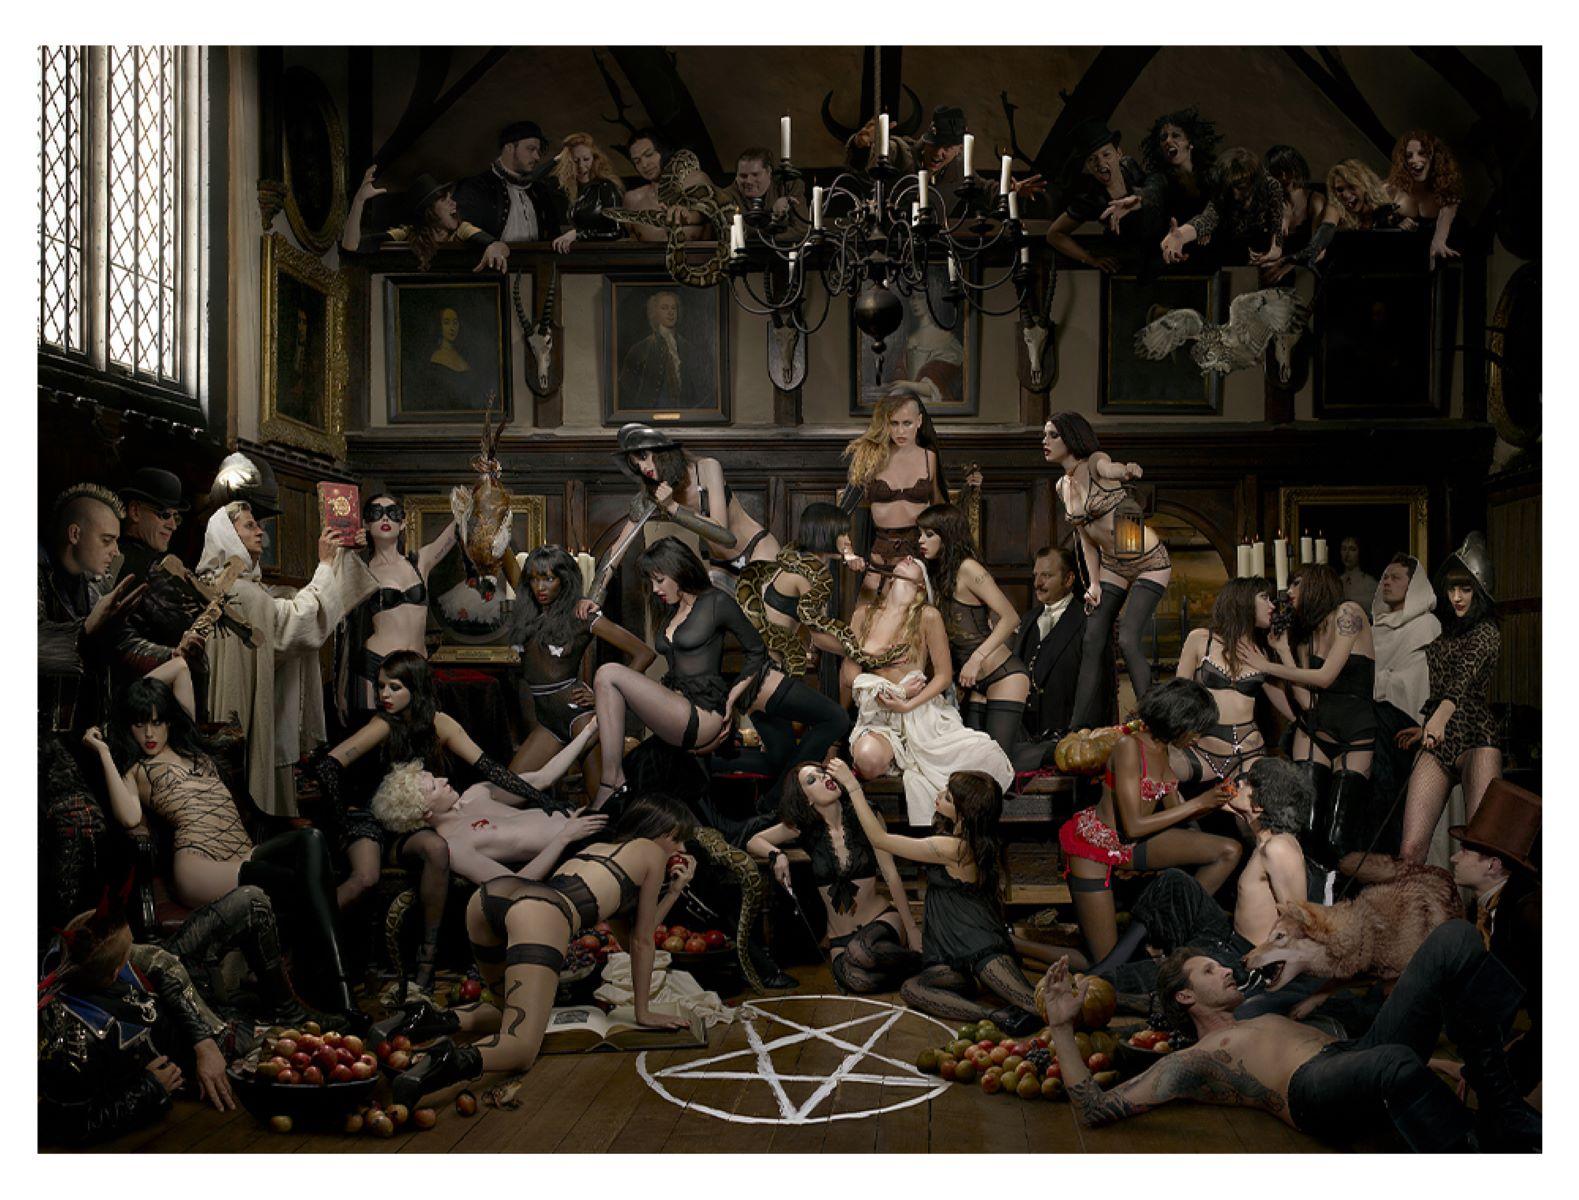 Tim Bret-Day Figurative Photograph - Season of the Witch - Agent Provocateur 